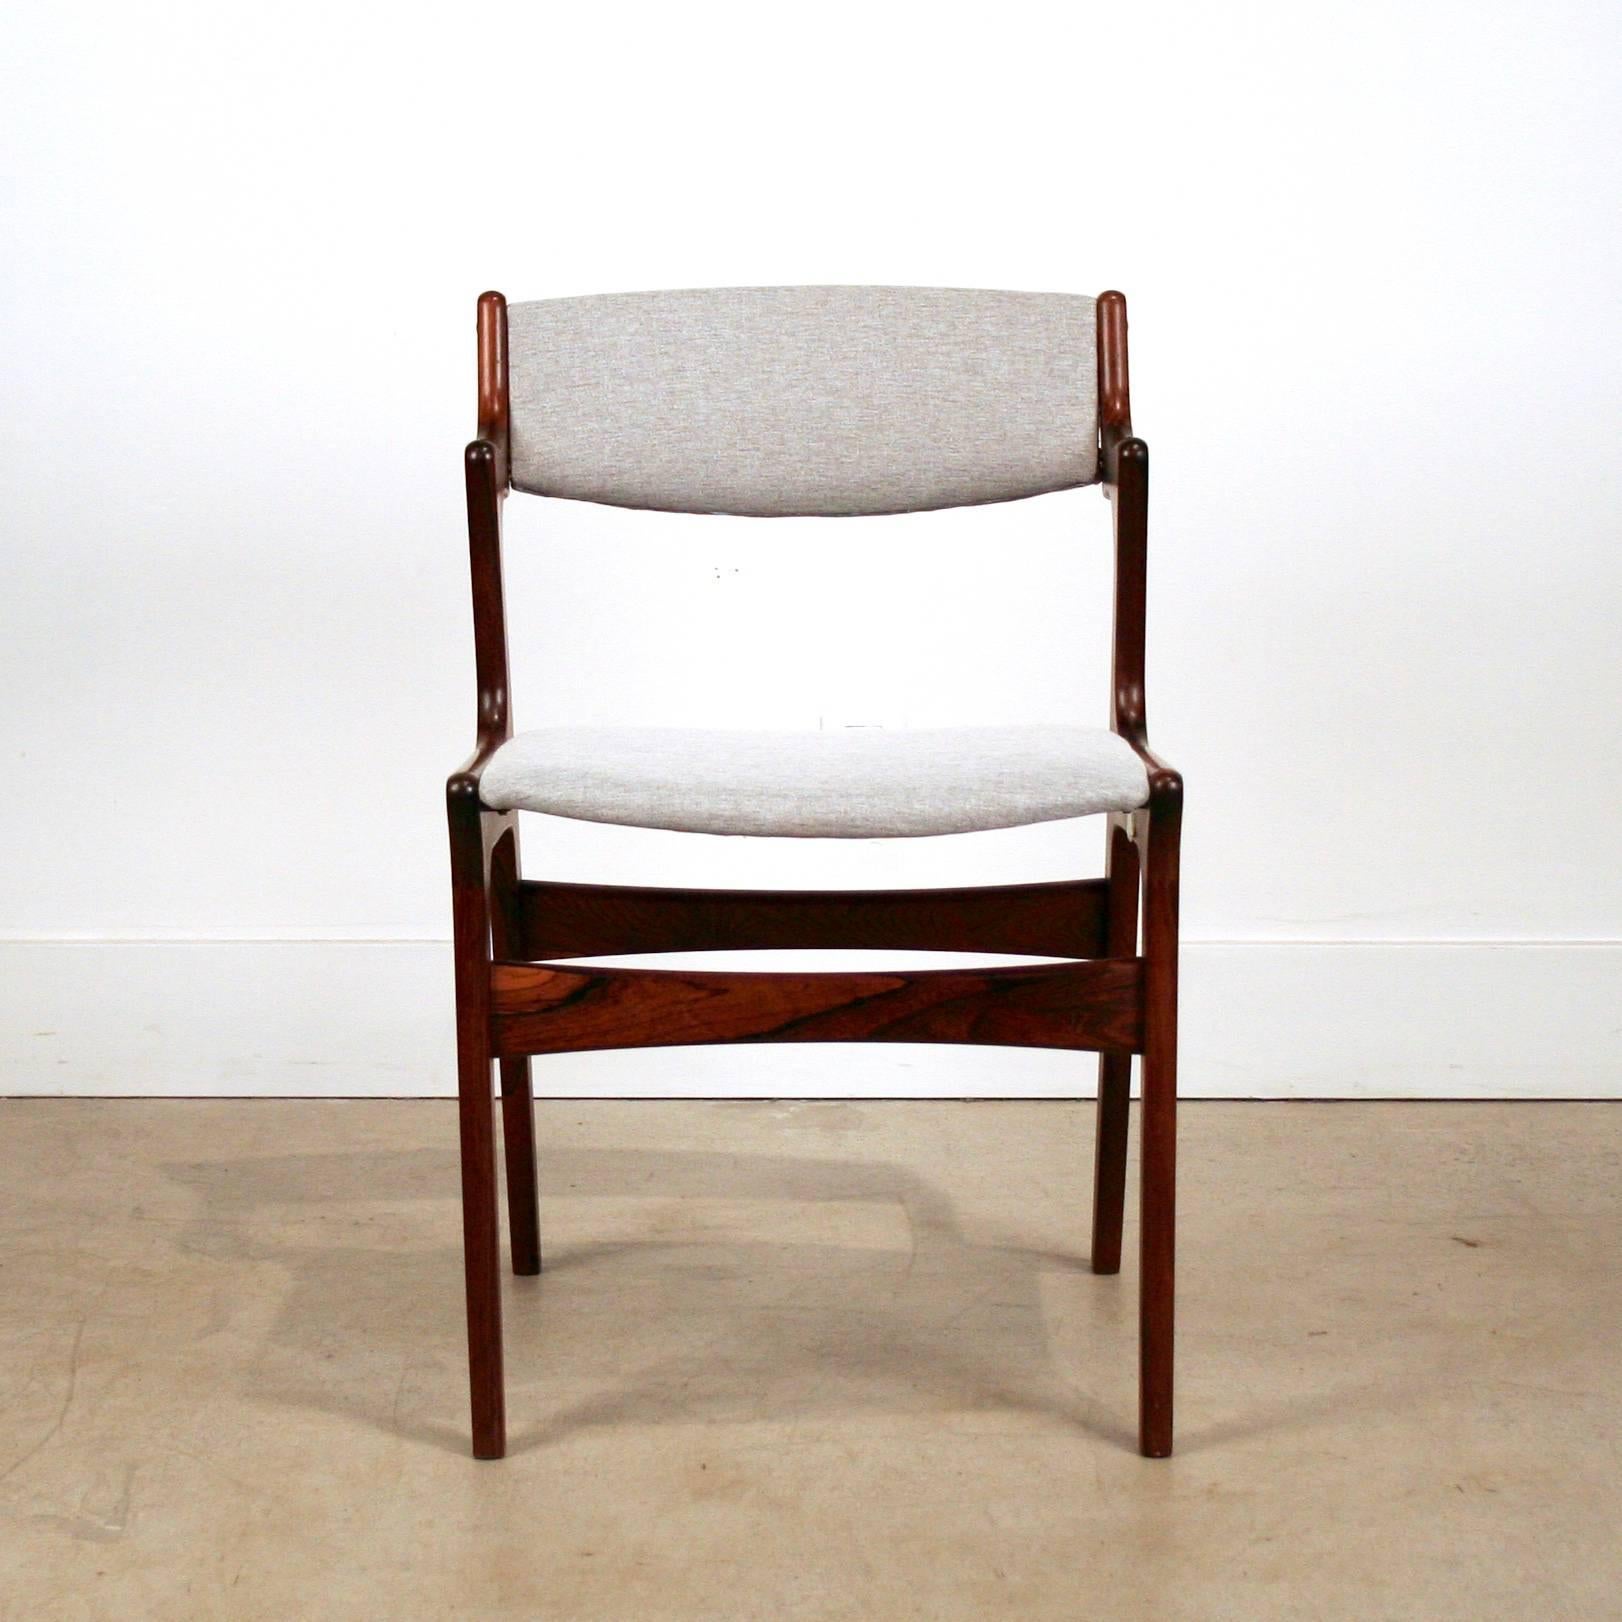 Mid-Century Brazilian rosewood dining chairs manufactured by Nova Manufacturing, Denmark. The chairs feature solid rosewood frames with half arms, rich dark grain and exposed finger joinery. Newly upholstered in light grey fabric. Fully restored and